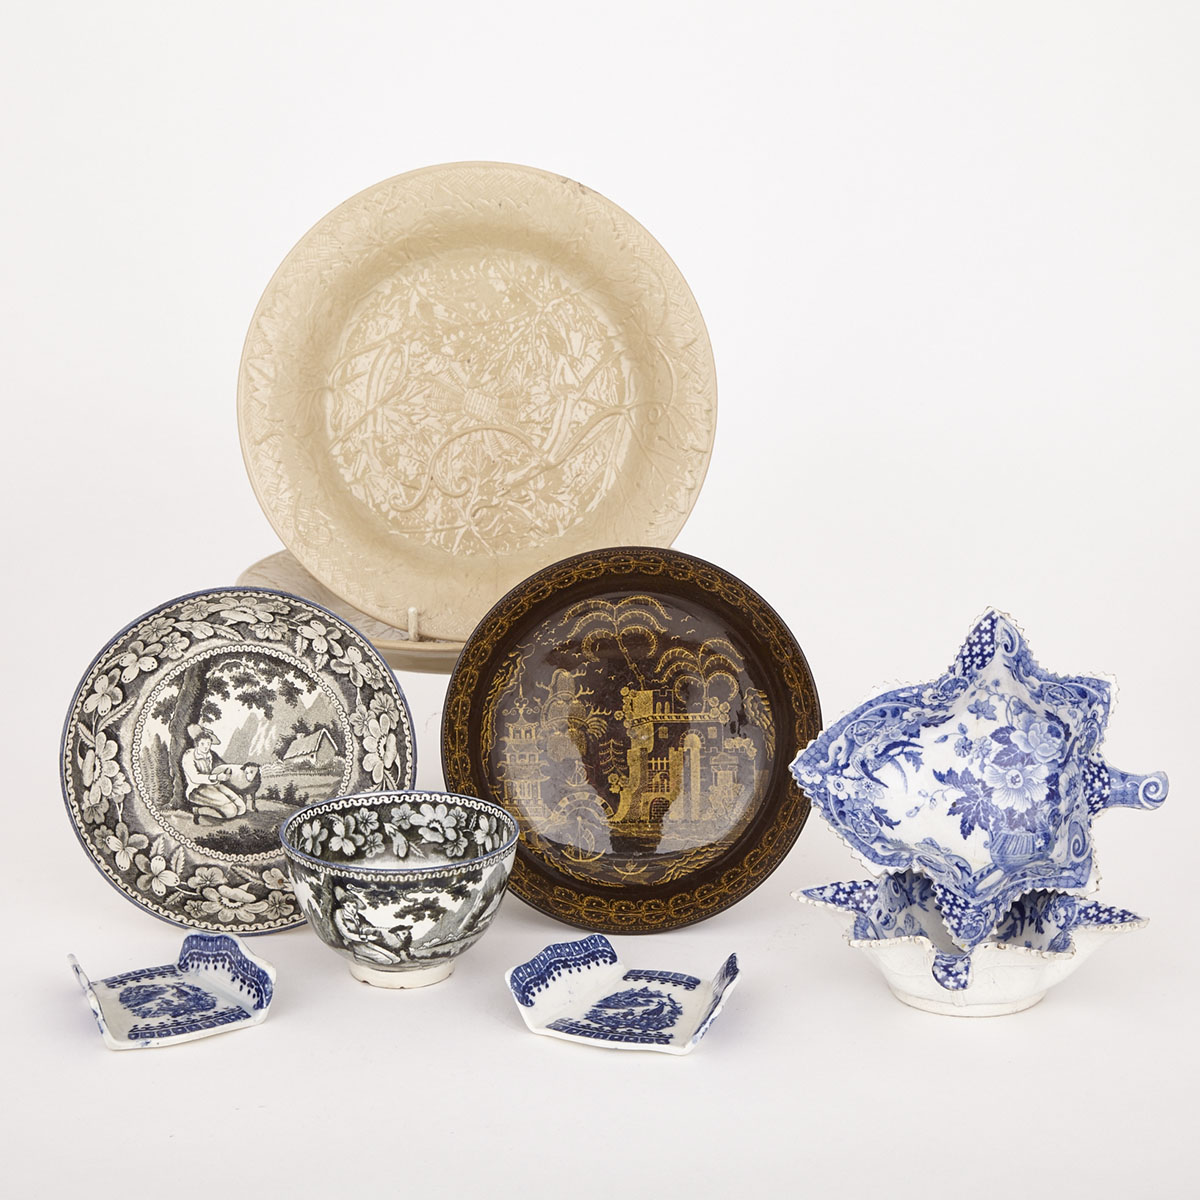 Group of English Pearlware and Drabware Table Articles, 19th century